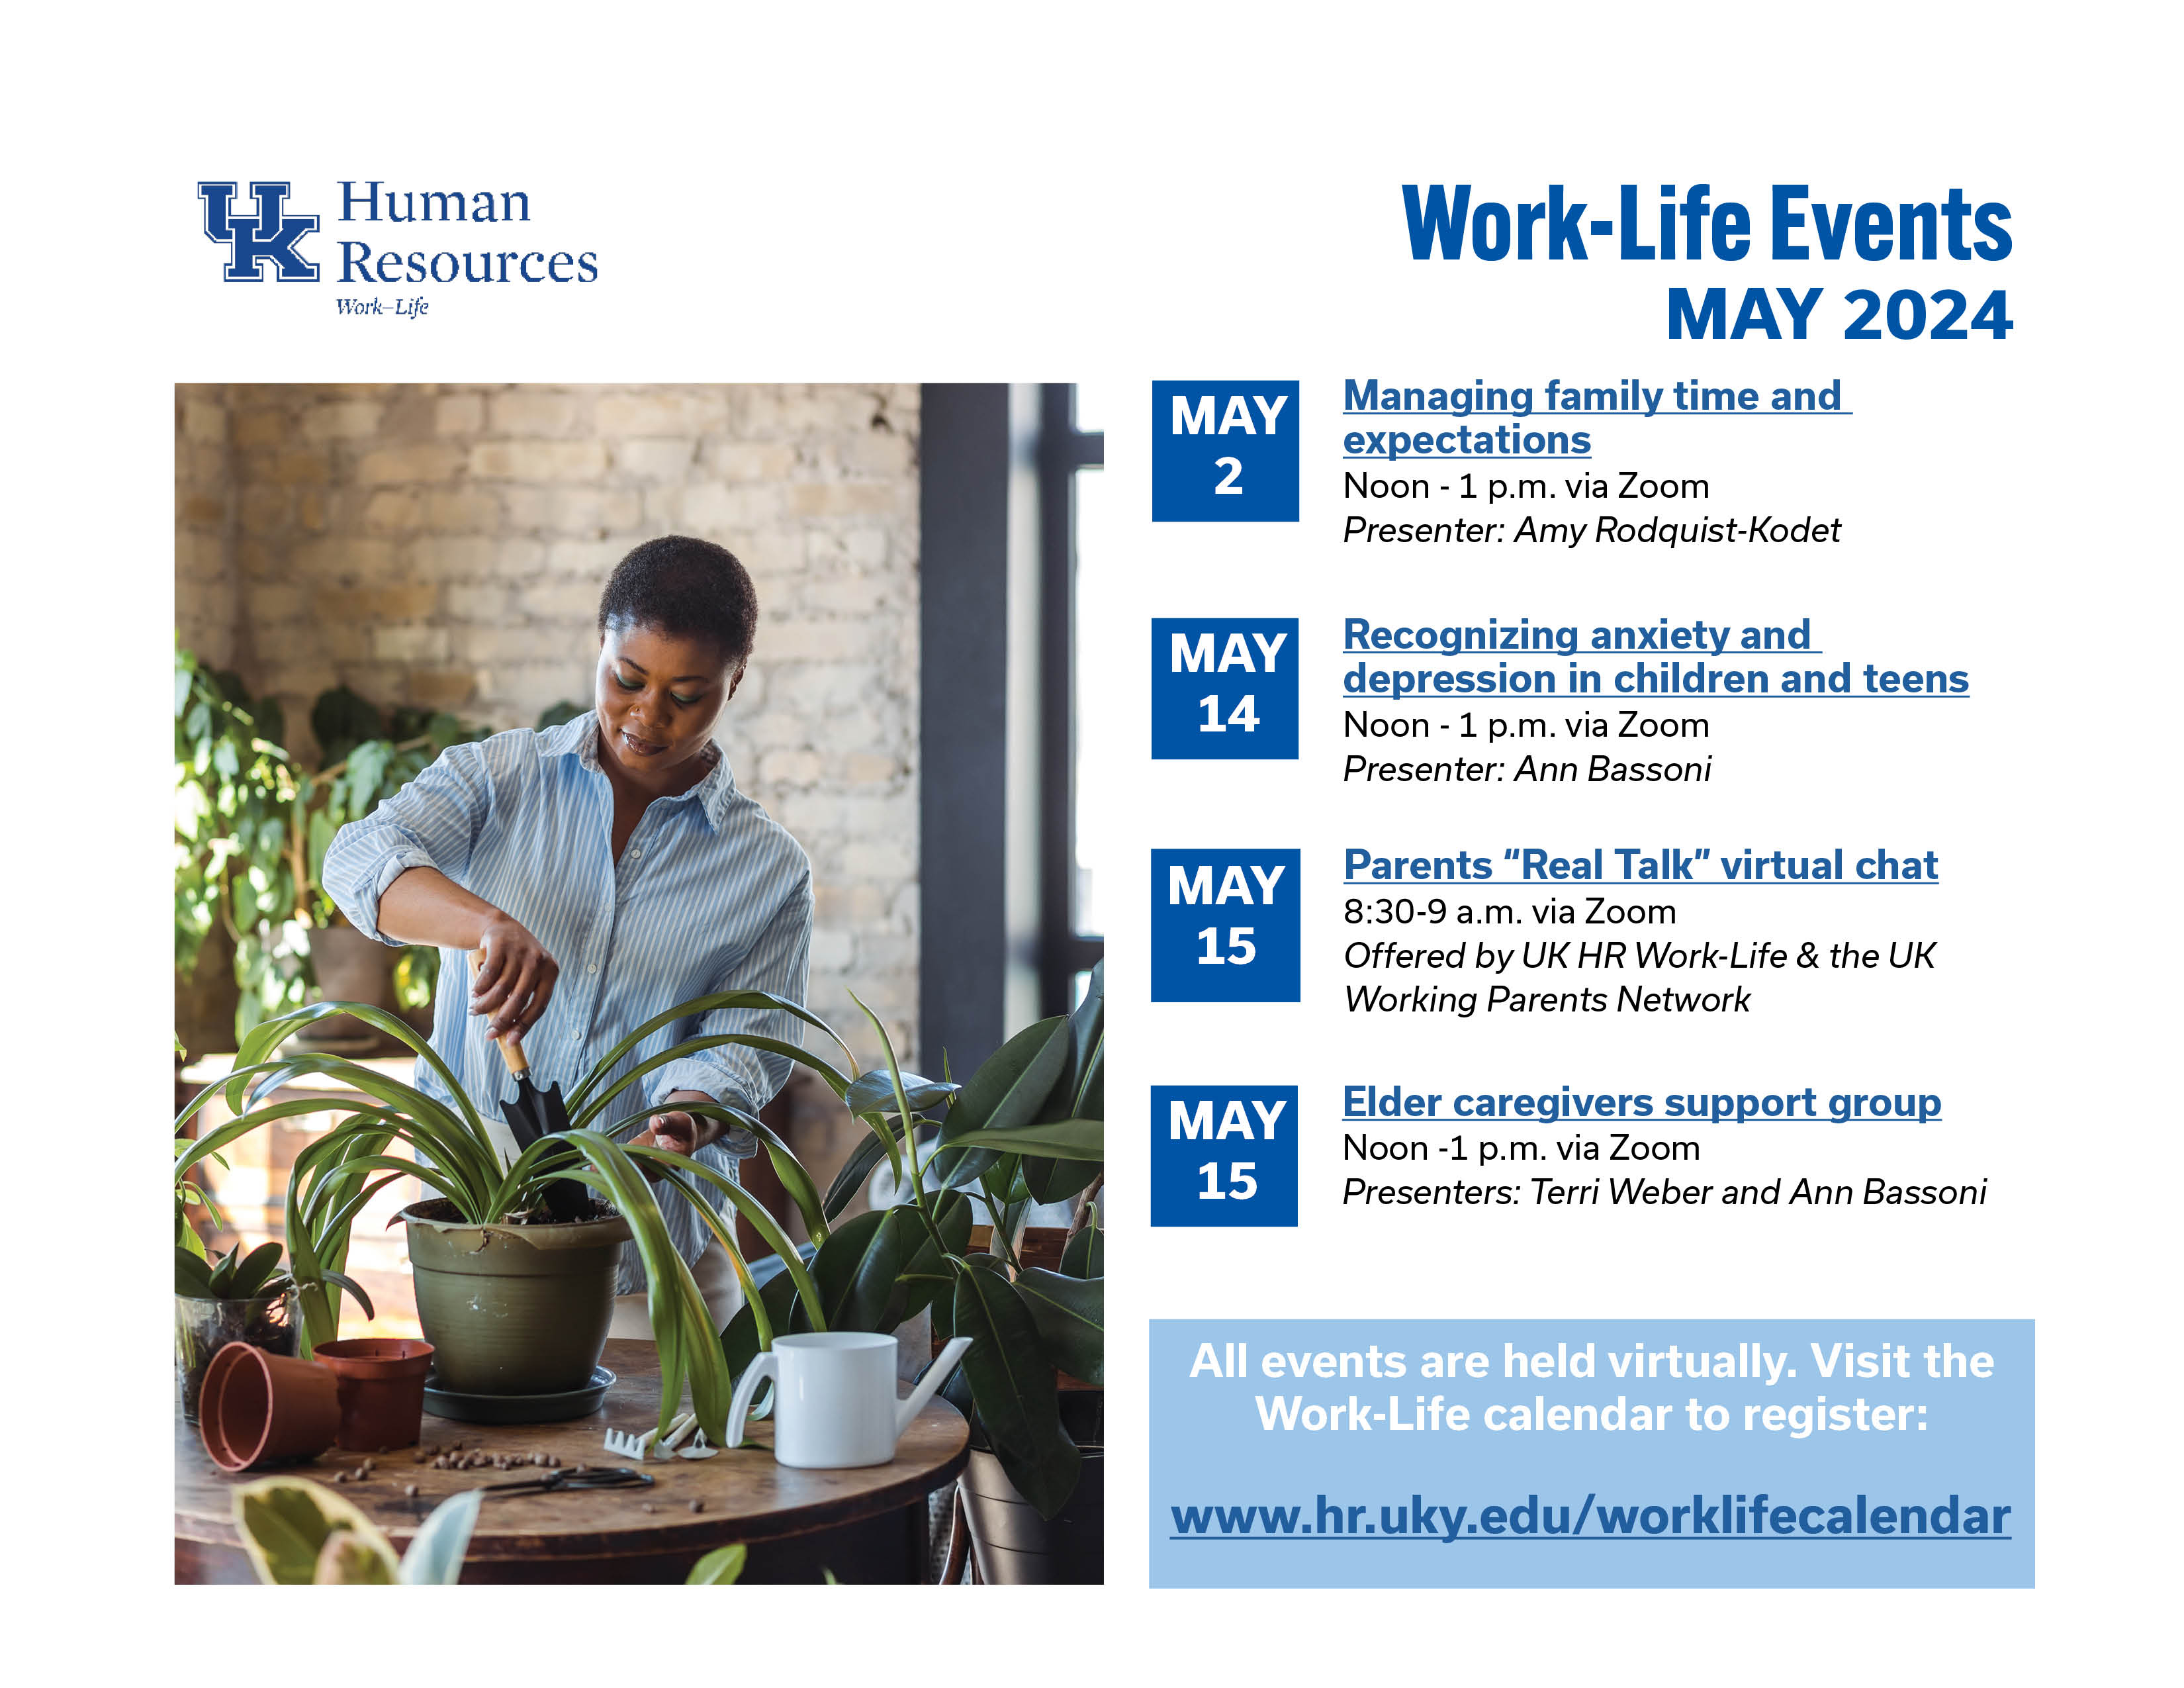 may_2024_worklife_events_flyer.jpg